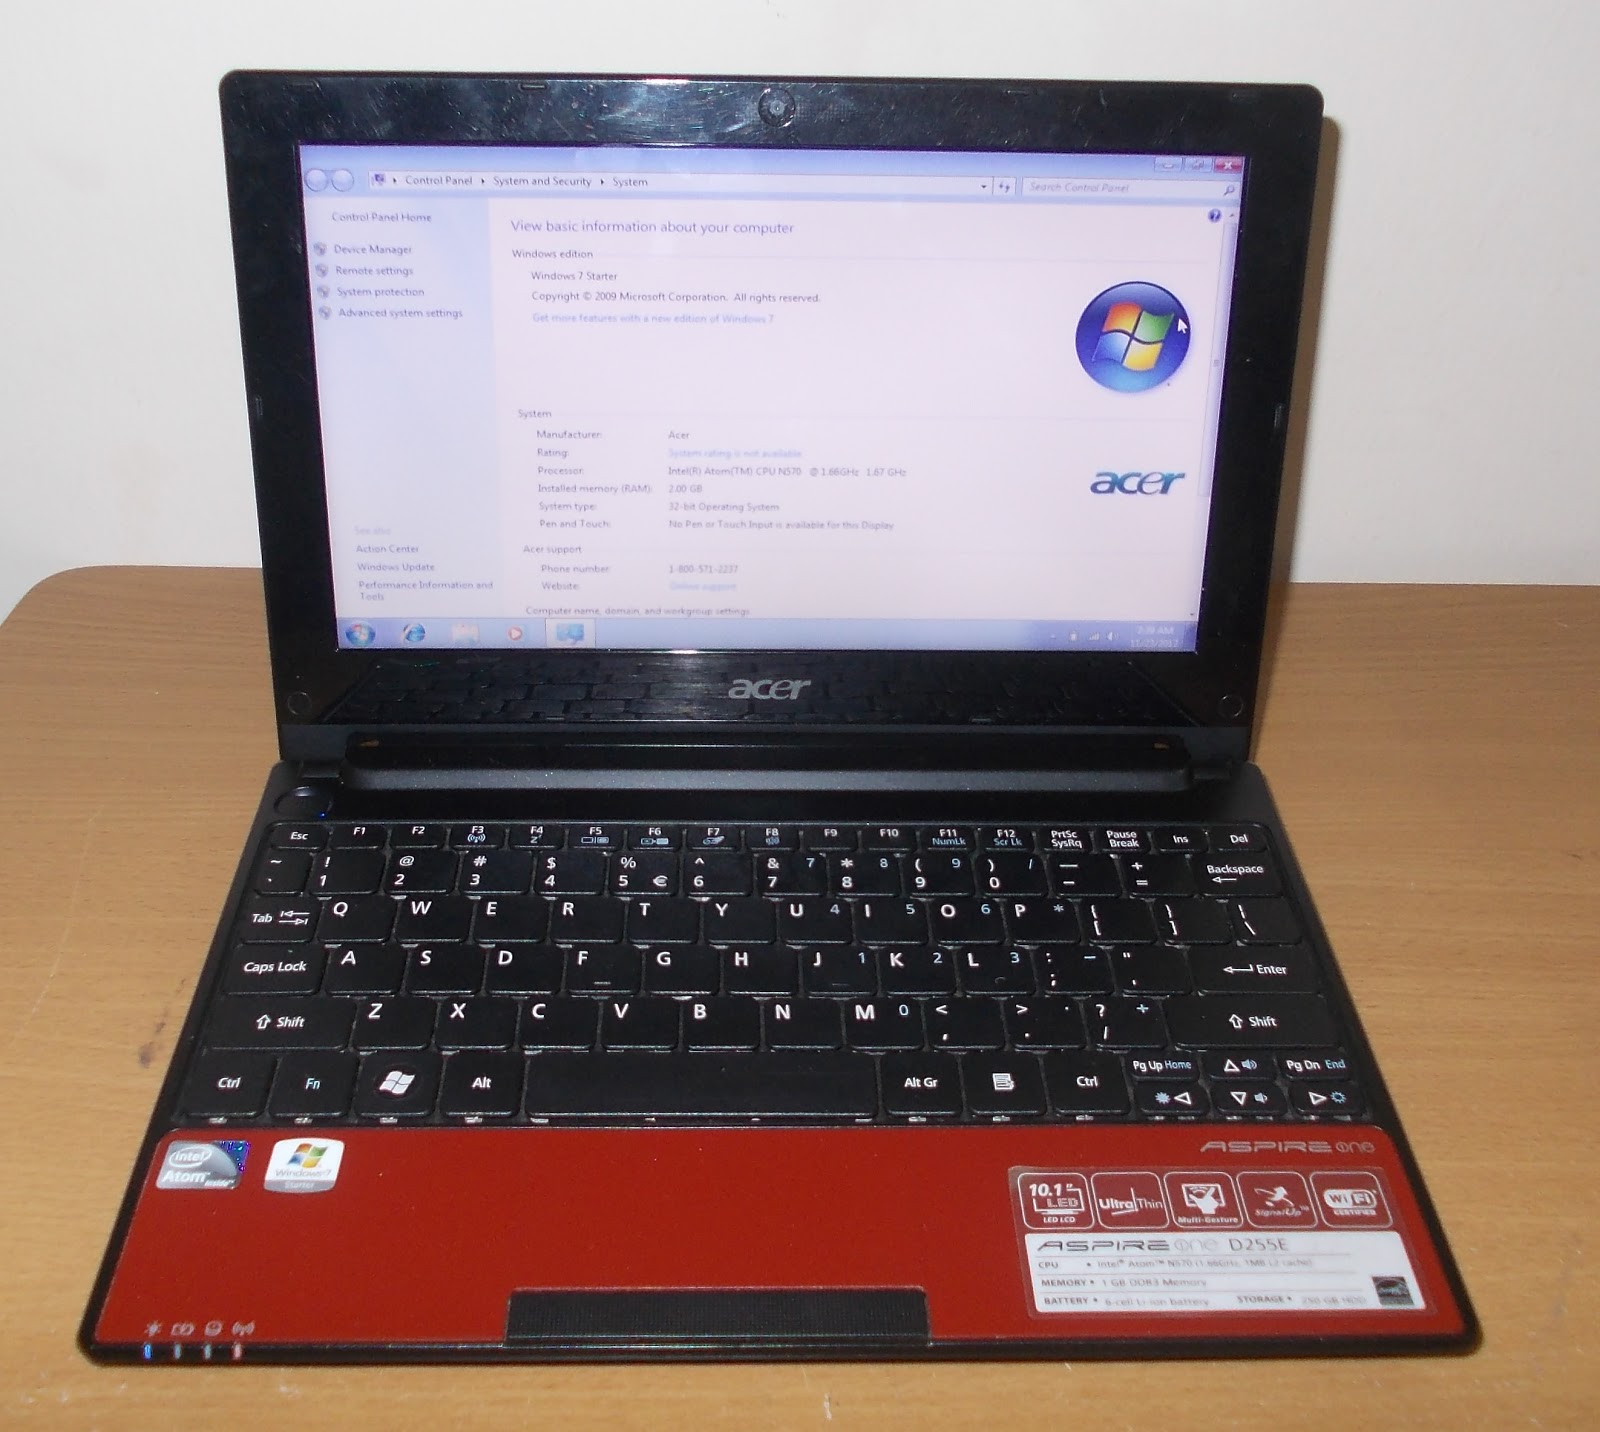 ... Sales and Services: USED Netbook Acer Aspire One D255E (RM 685